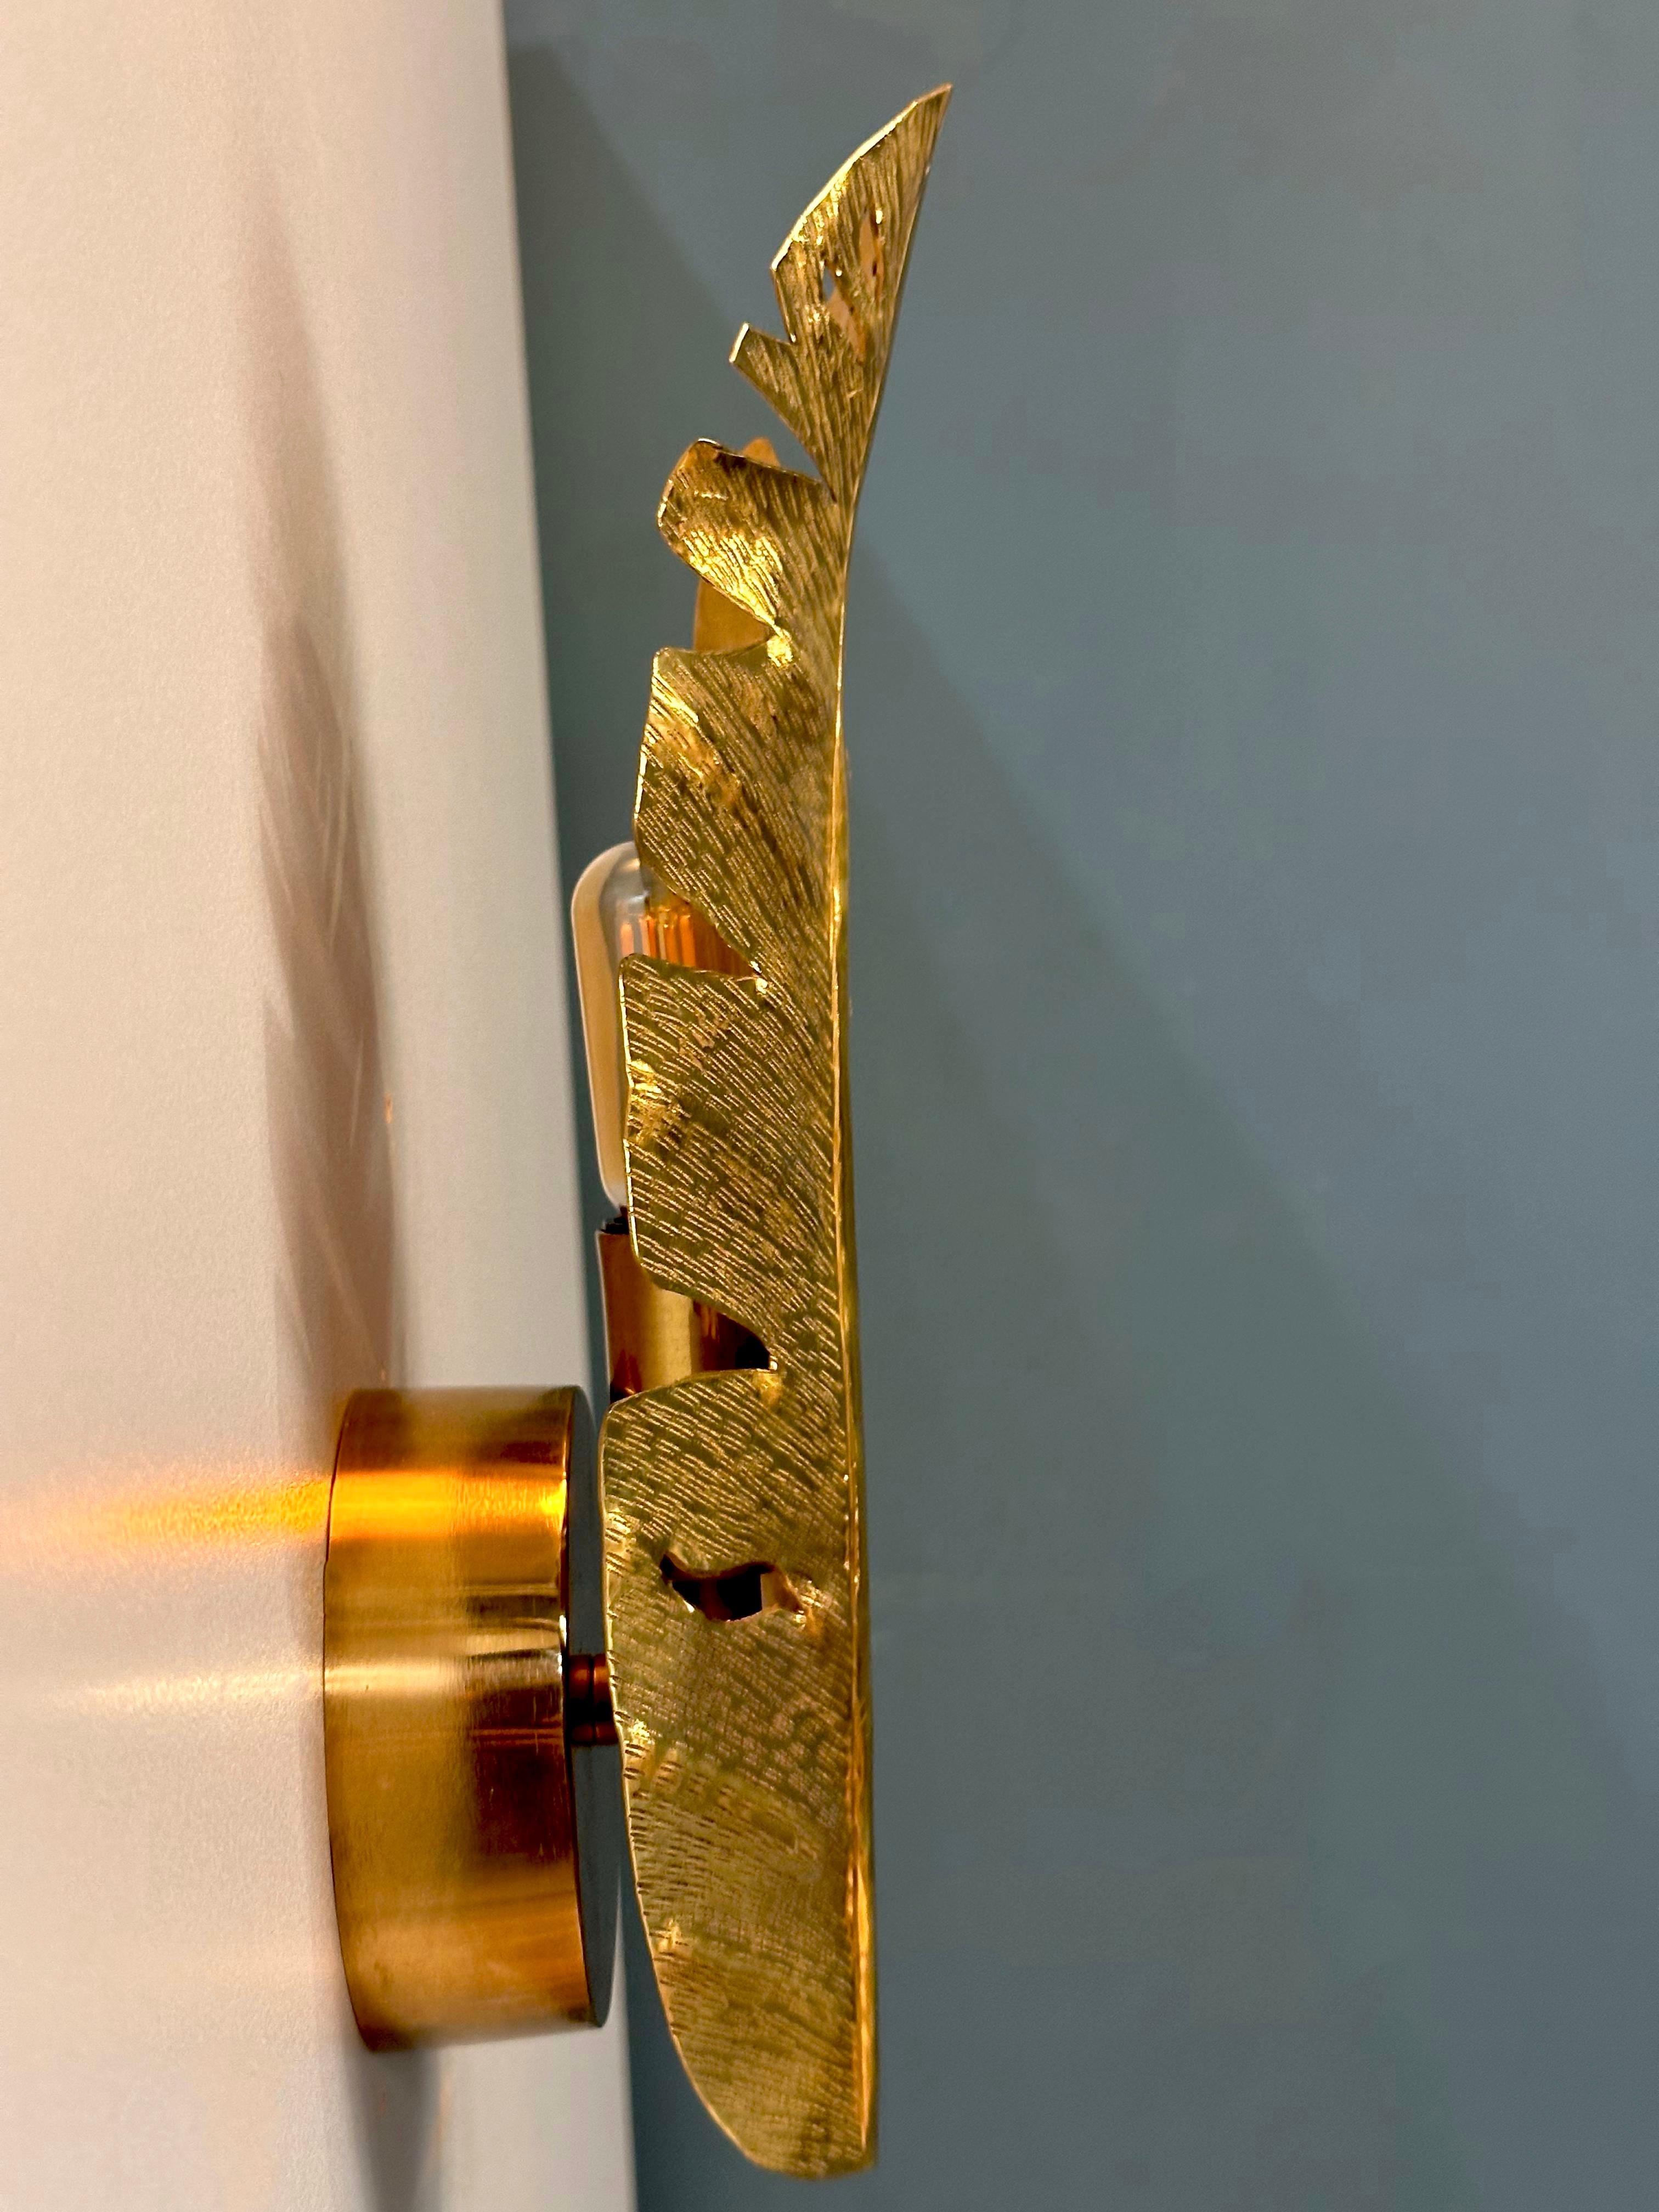 CASERTA Brass Wall Sconce, where artistry meets functionality in a symphony of brass craftsmanship. This unique wall sconce not only provides enchanting illumination but also serves as a captivating tribute to nature, meticulously bringing the